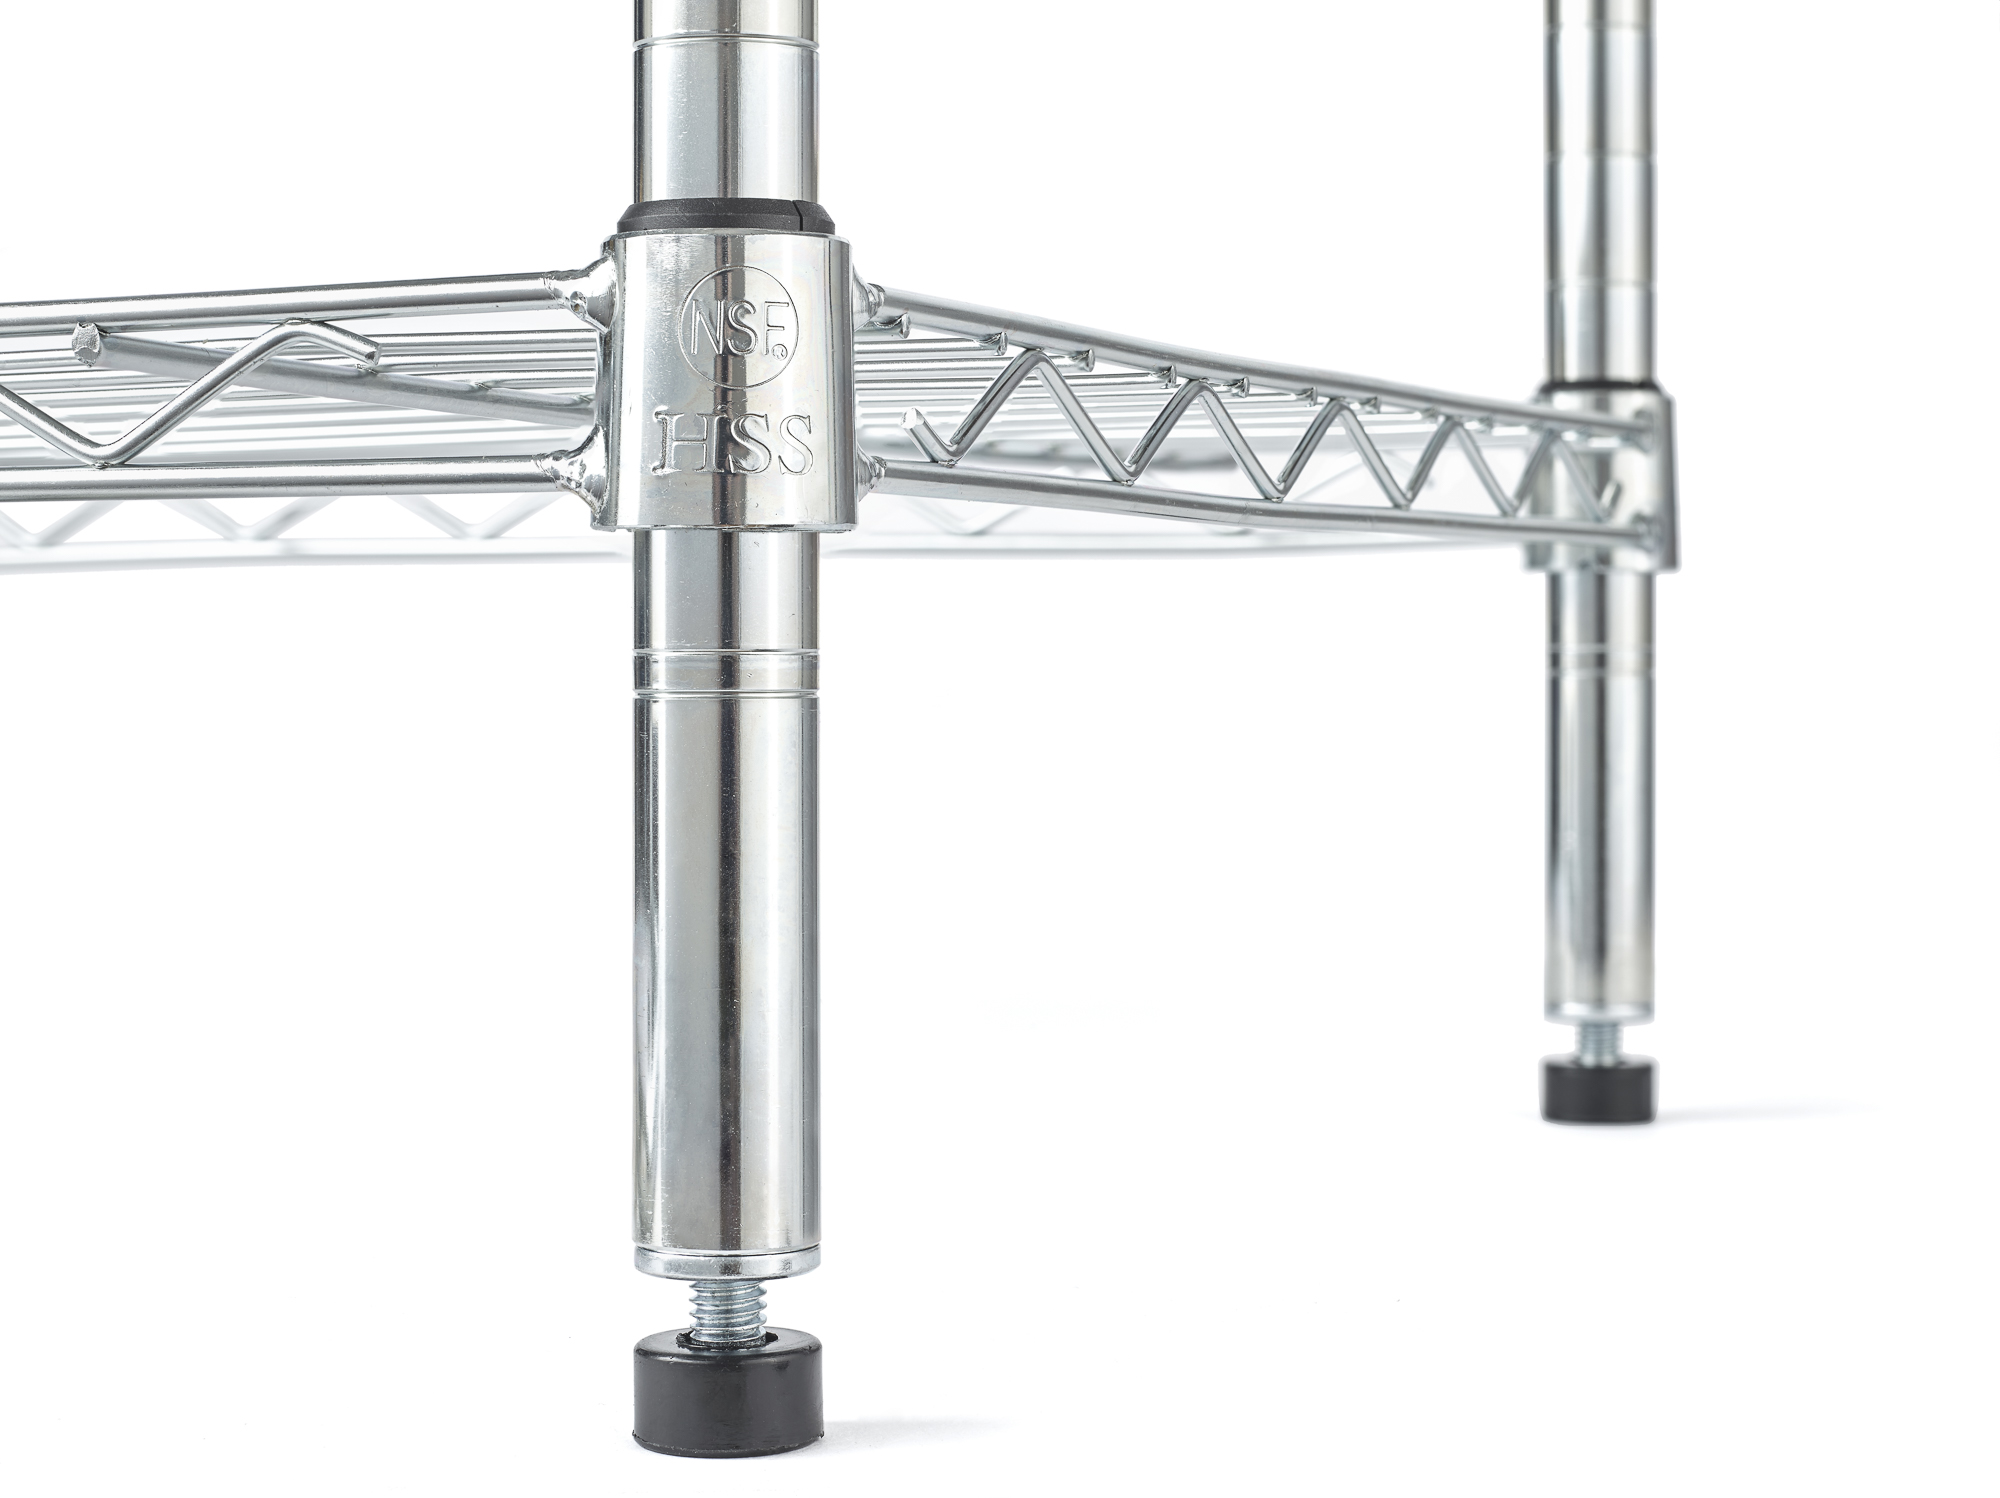 Hyper Tough 4 Shelf Steel Wire Shelving Tower with Caster 16"Dx16"Wx57.4"H, Chrome - image 5 of 6